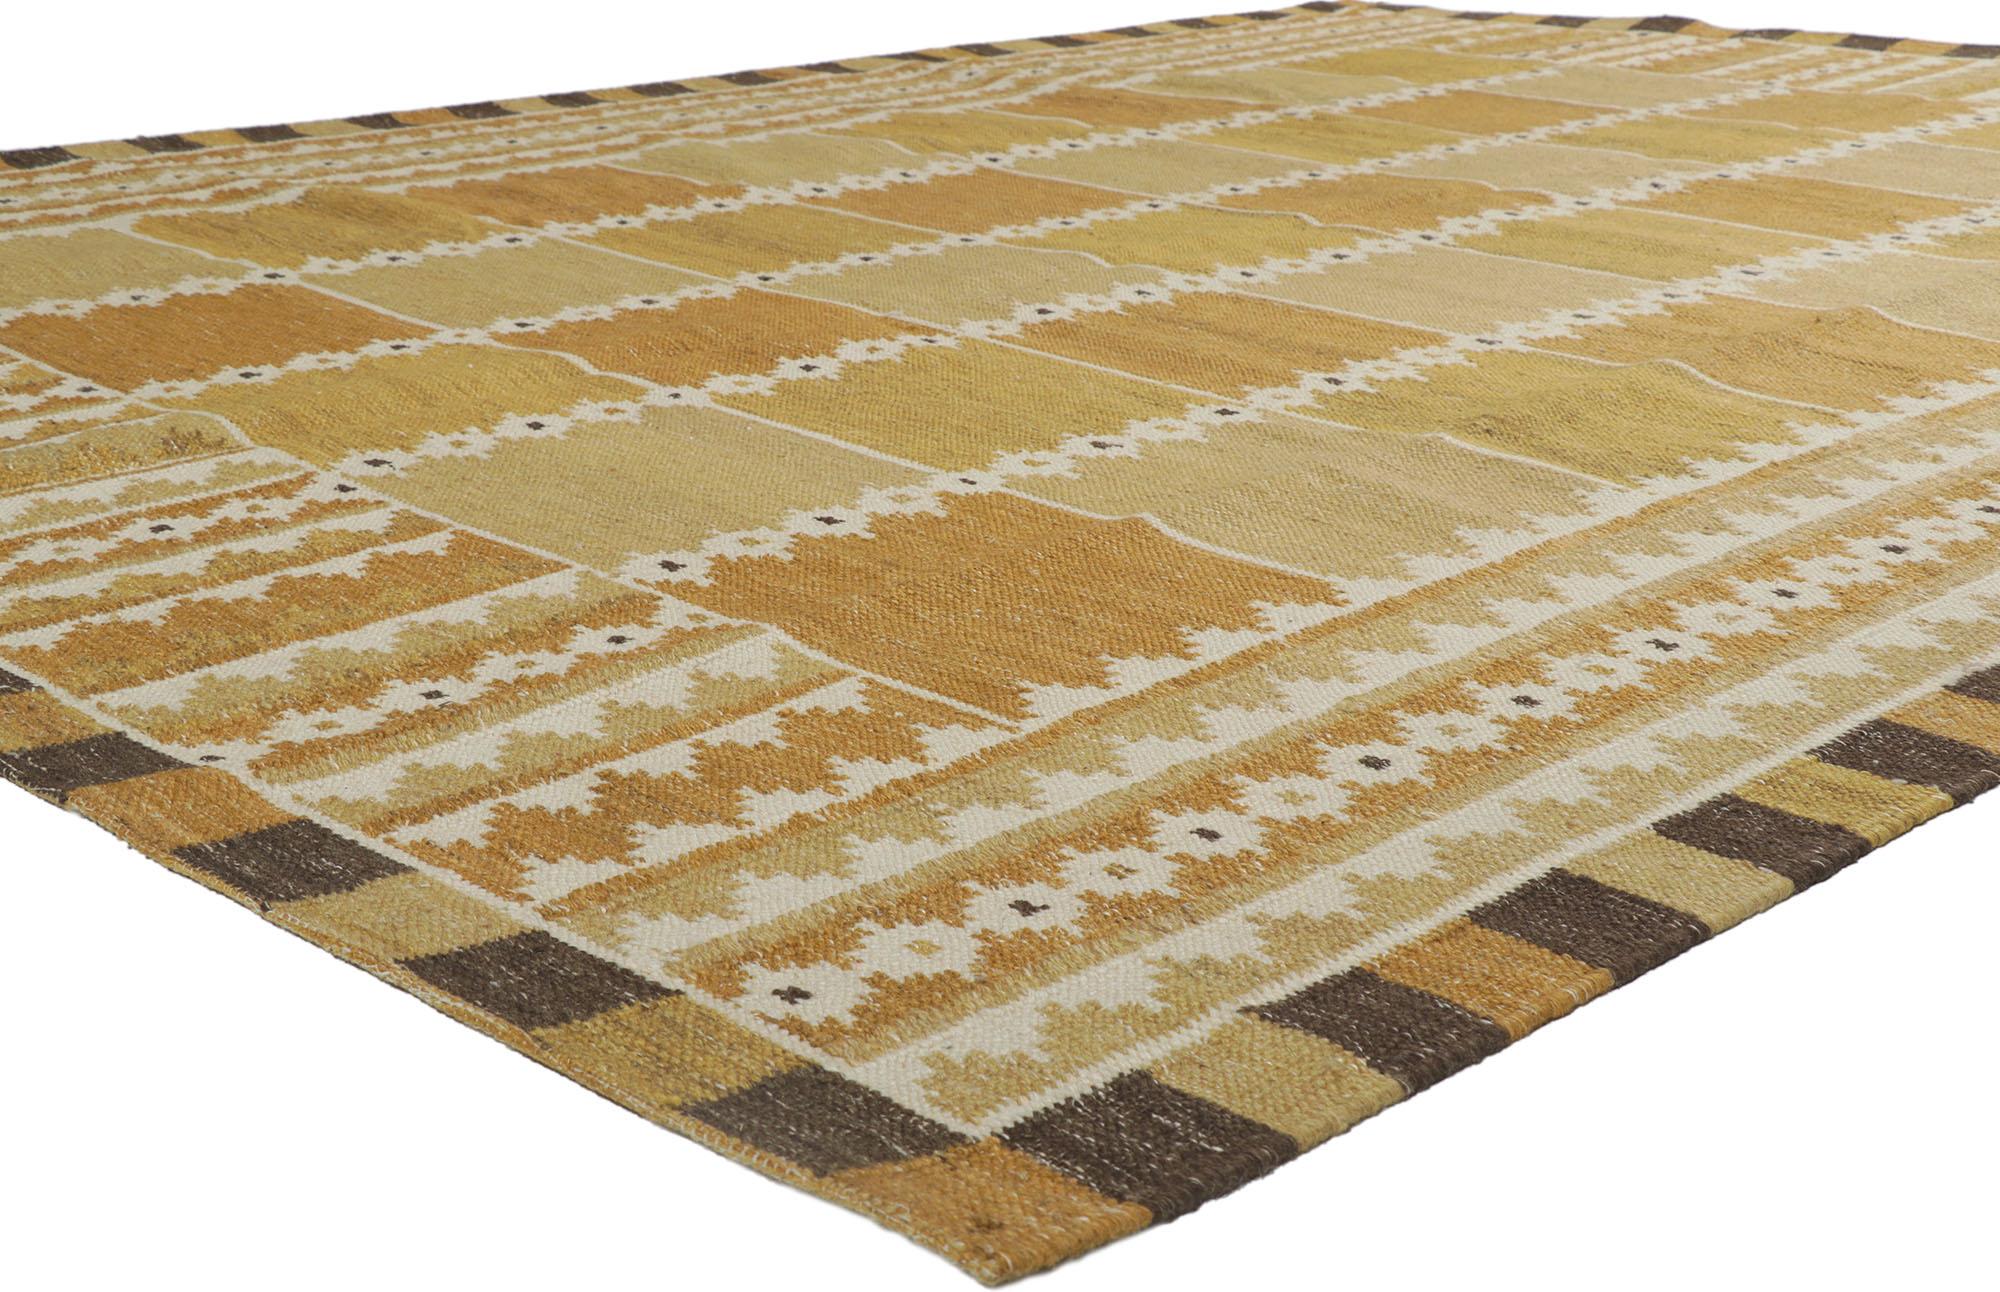 30682 new Swedish inspired Kilim rug with Scandinavian Modern style 09'00 x 11'10. With its geometric design and bohemian hygge vibes, this hand-woven wool Swedish inspired Kilim rug beautifully embodies the simplicity of Scandinavian modern style.